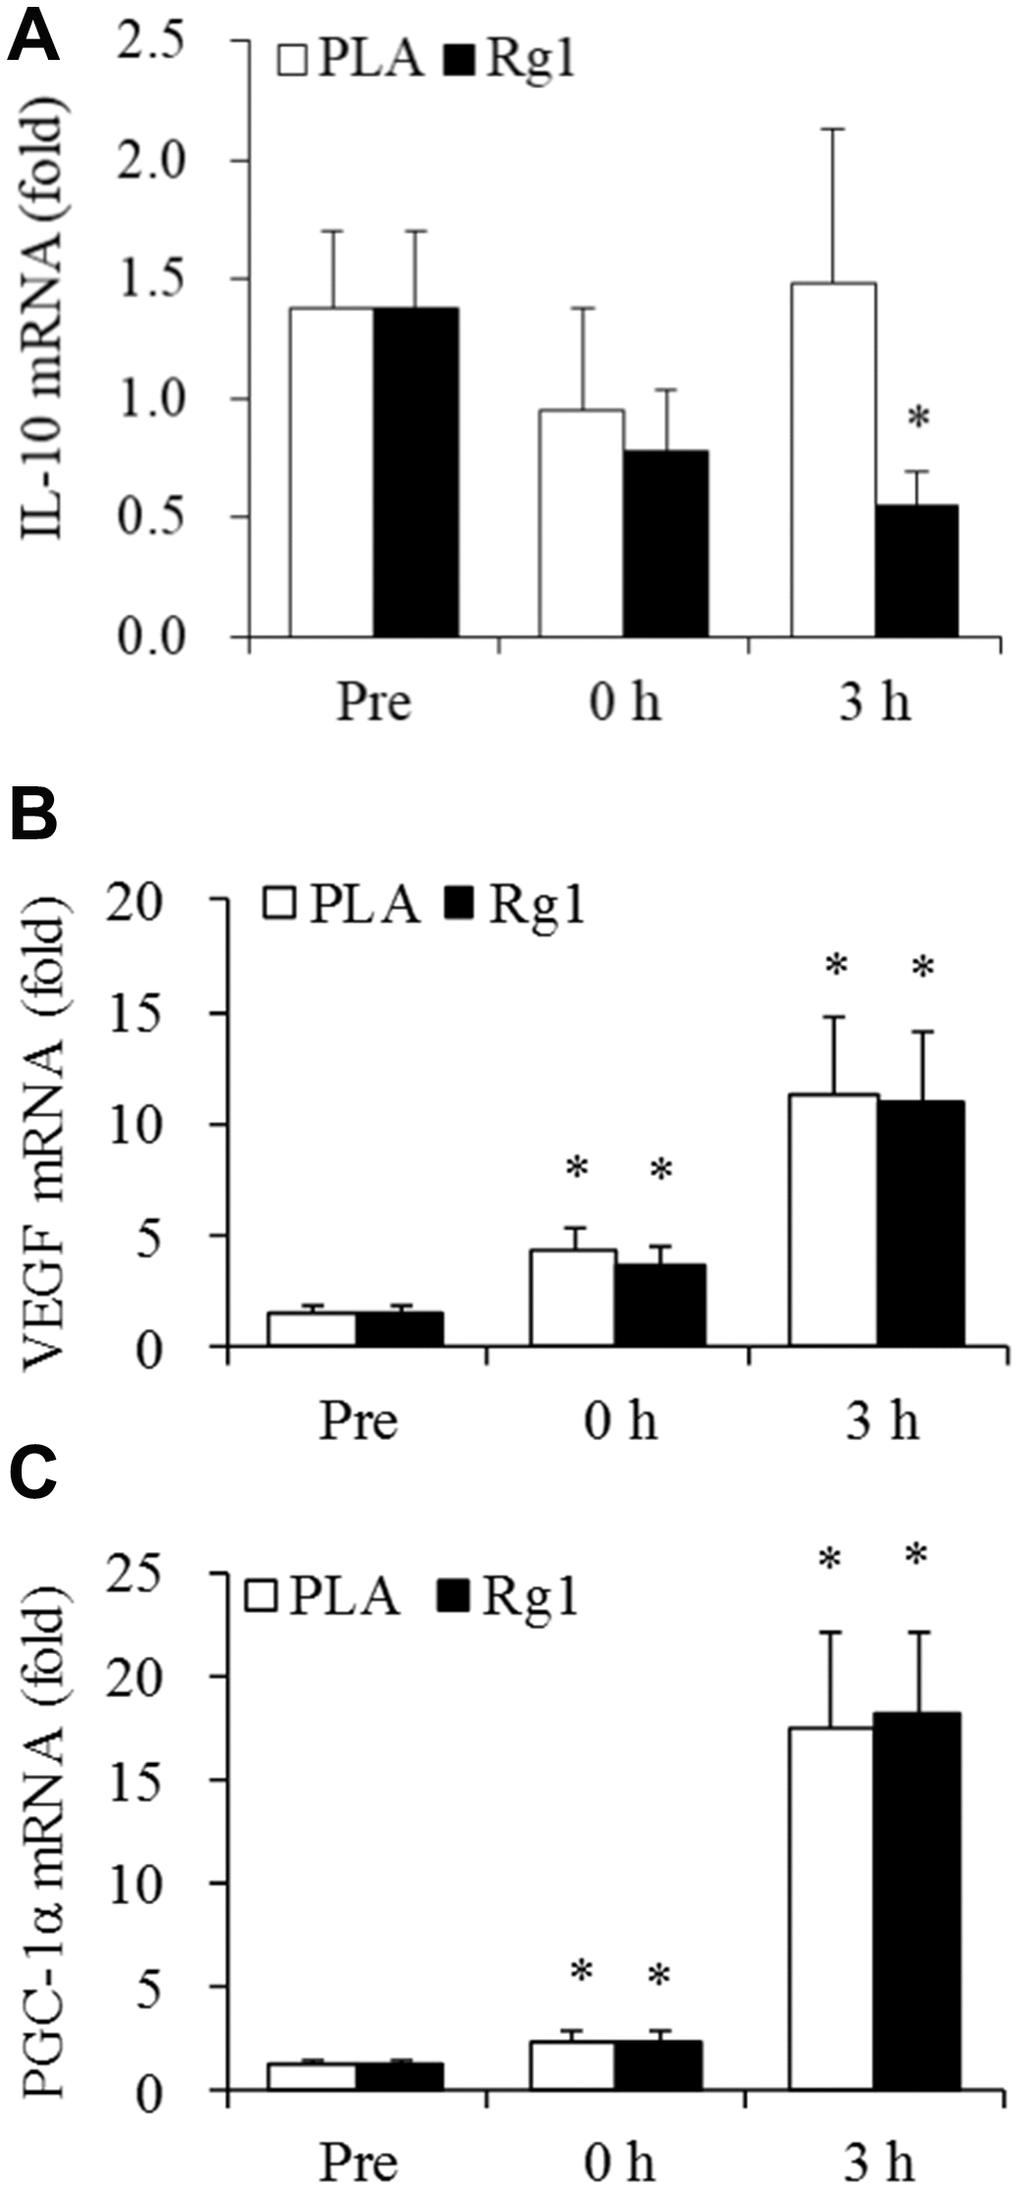 IL-10, VEGF, and PGC1-alpha expression after aerobic exercise. (A) Rg1 supplementation lowers IL-10 mRNA 3 h after exercise (-60%, P B) and PGC1-alpha mRNA (C) occurred 3 h after 1-h cycling exercise (70% V̇O2max). Data are expressed as mean and SEM. * Significant difference against Pre (Baseline), P 